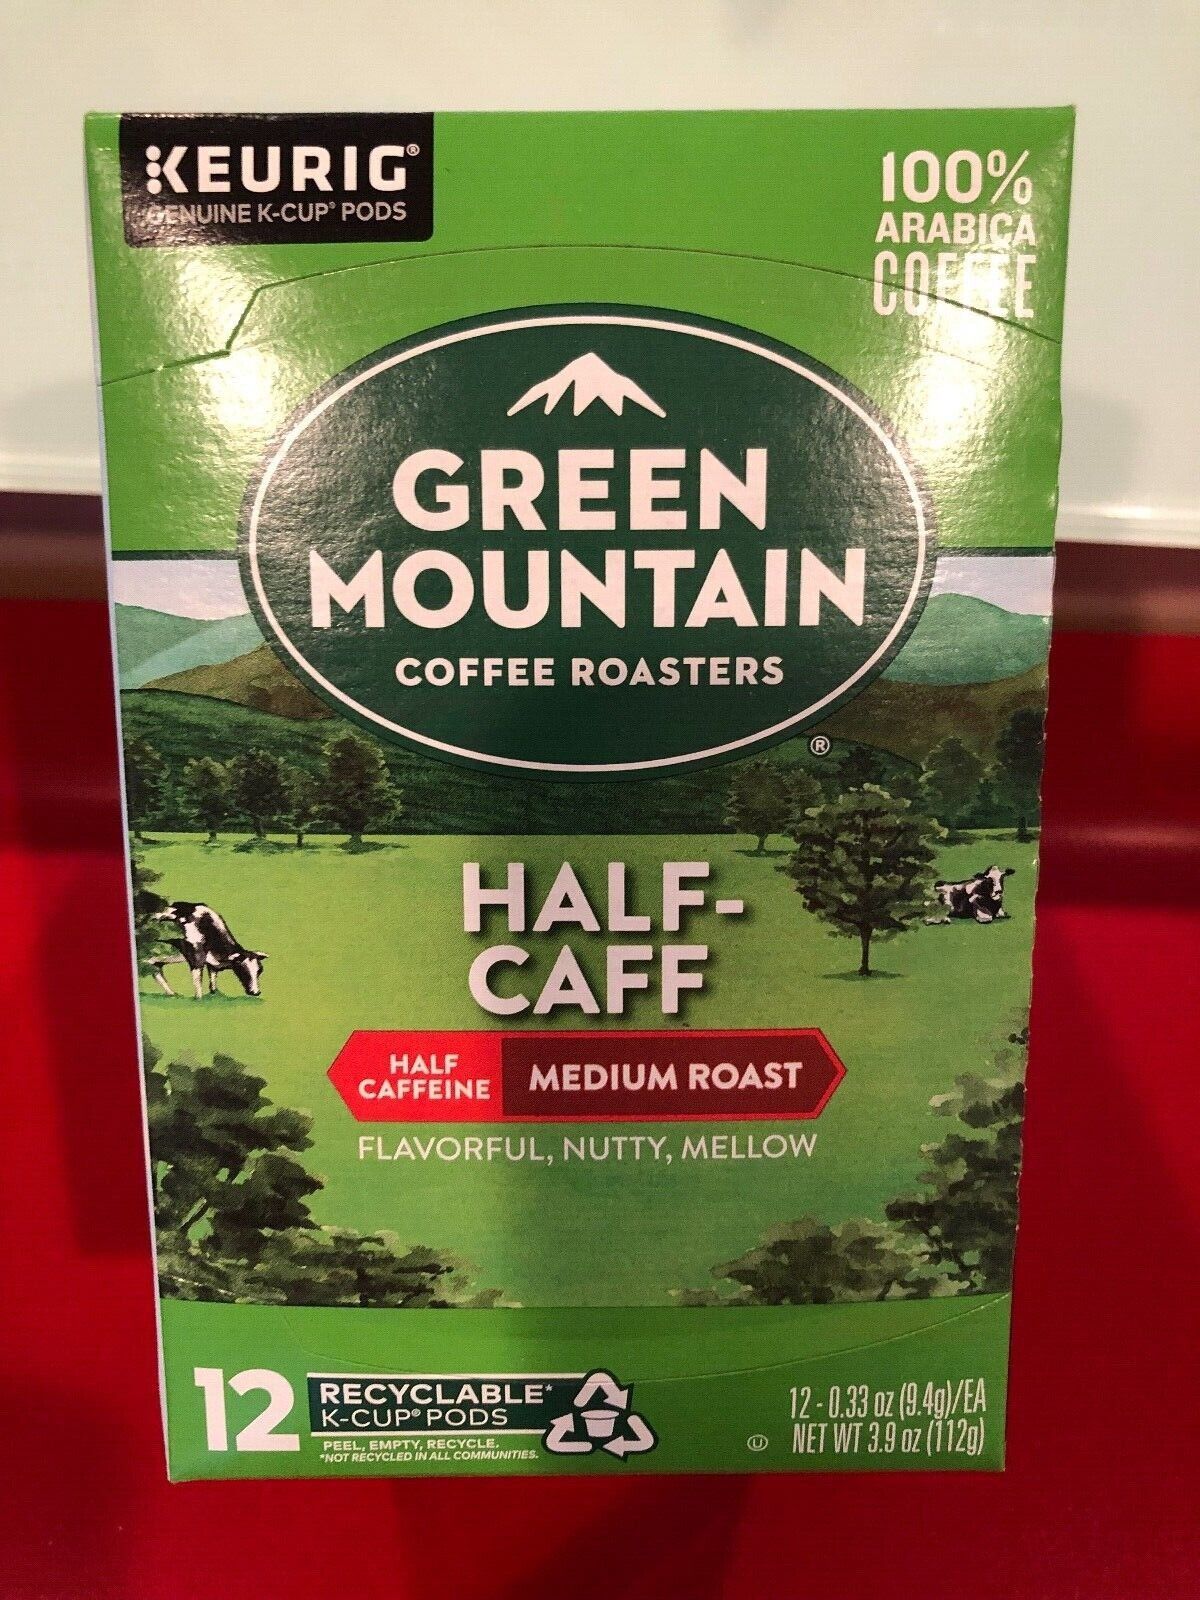 Primary image for GREEN MOUNTAIN COFFEE ROASTERS HALF CAFF SINGLE SERVE MEDIUM ROAST KCUPS 12CT